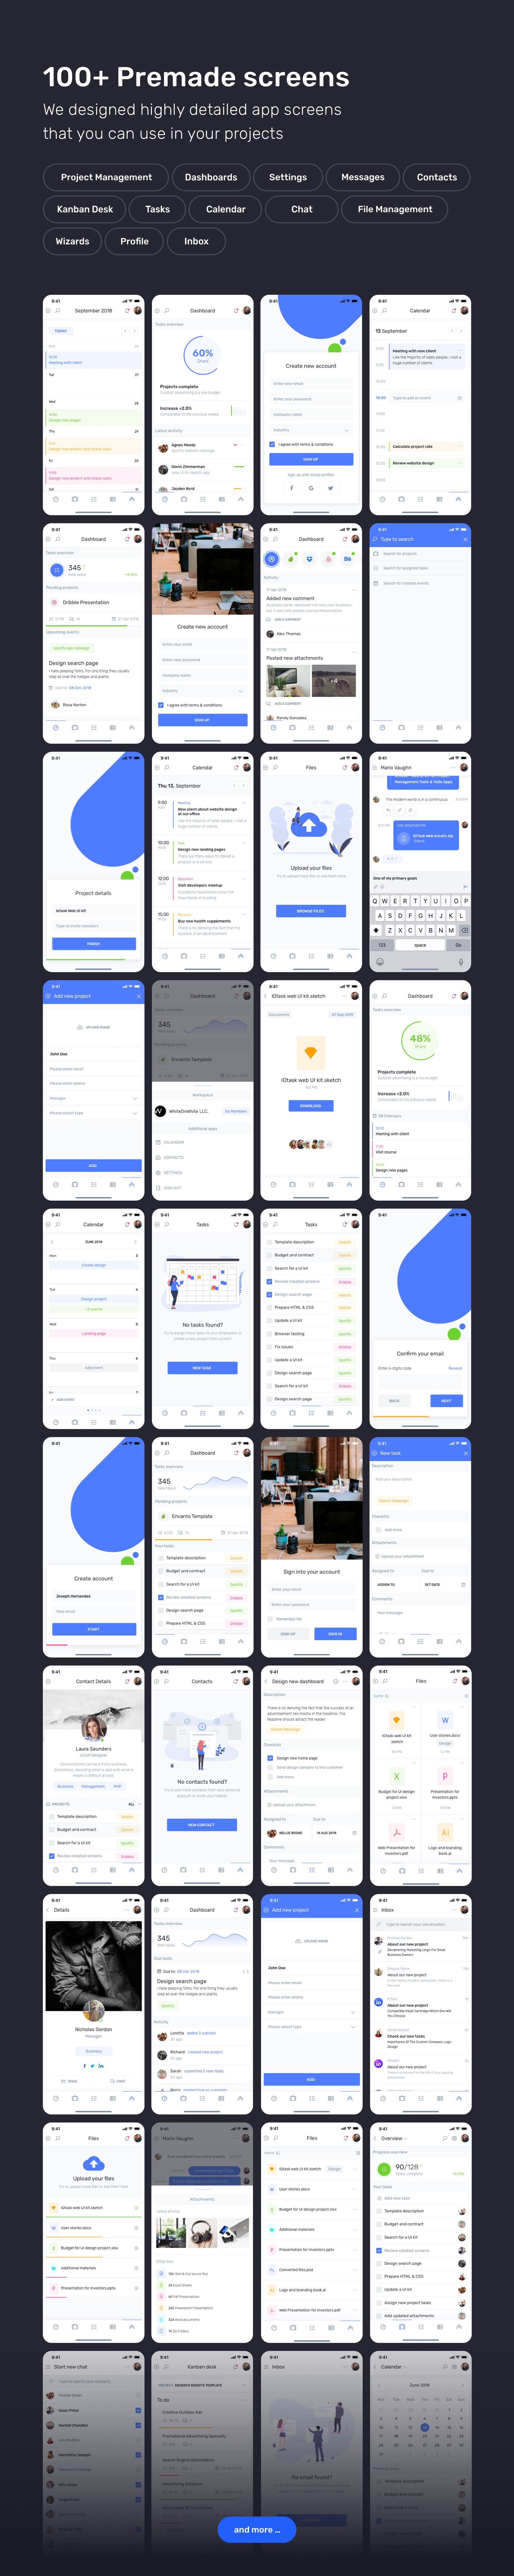 IOTASK Mobile - UI Kit for Todo & Management Apps - 7